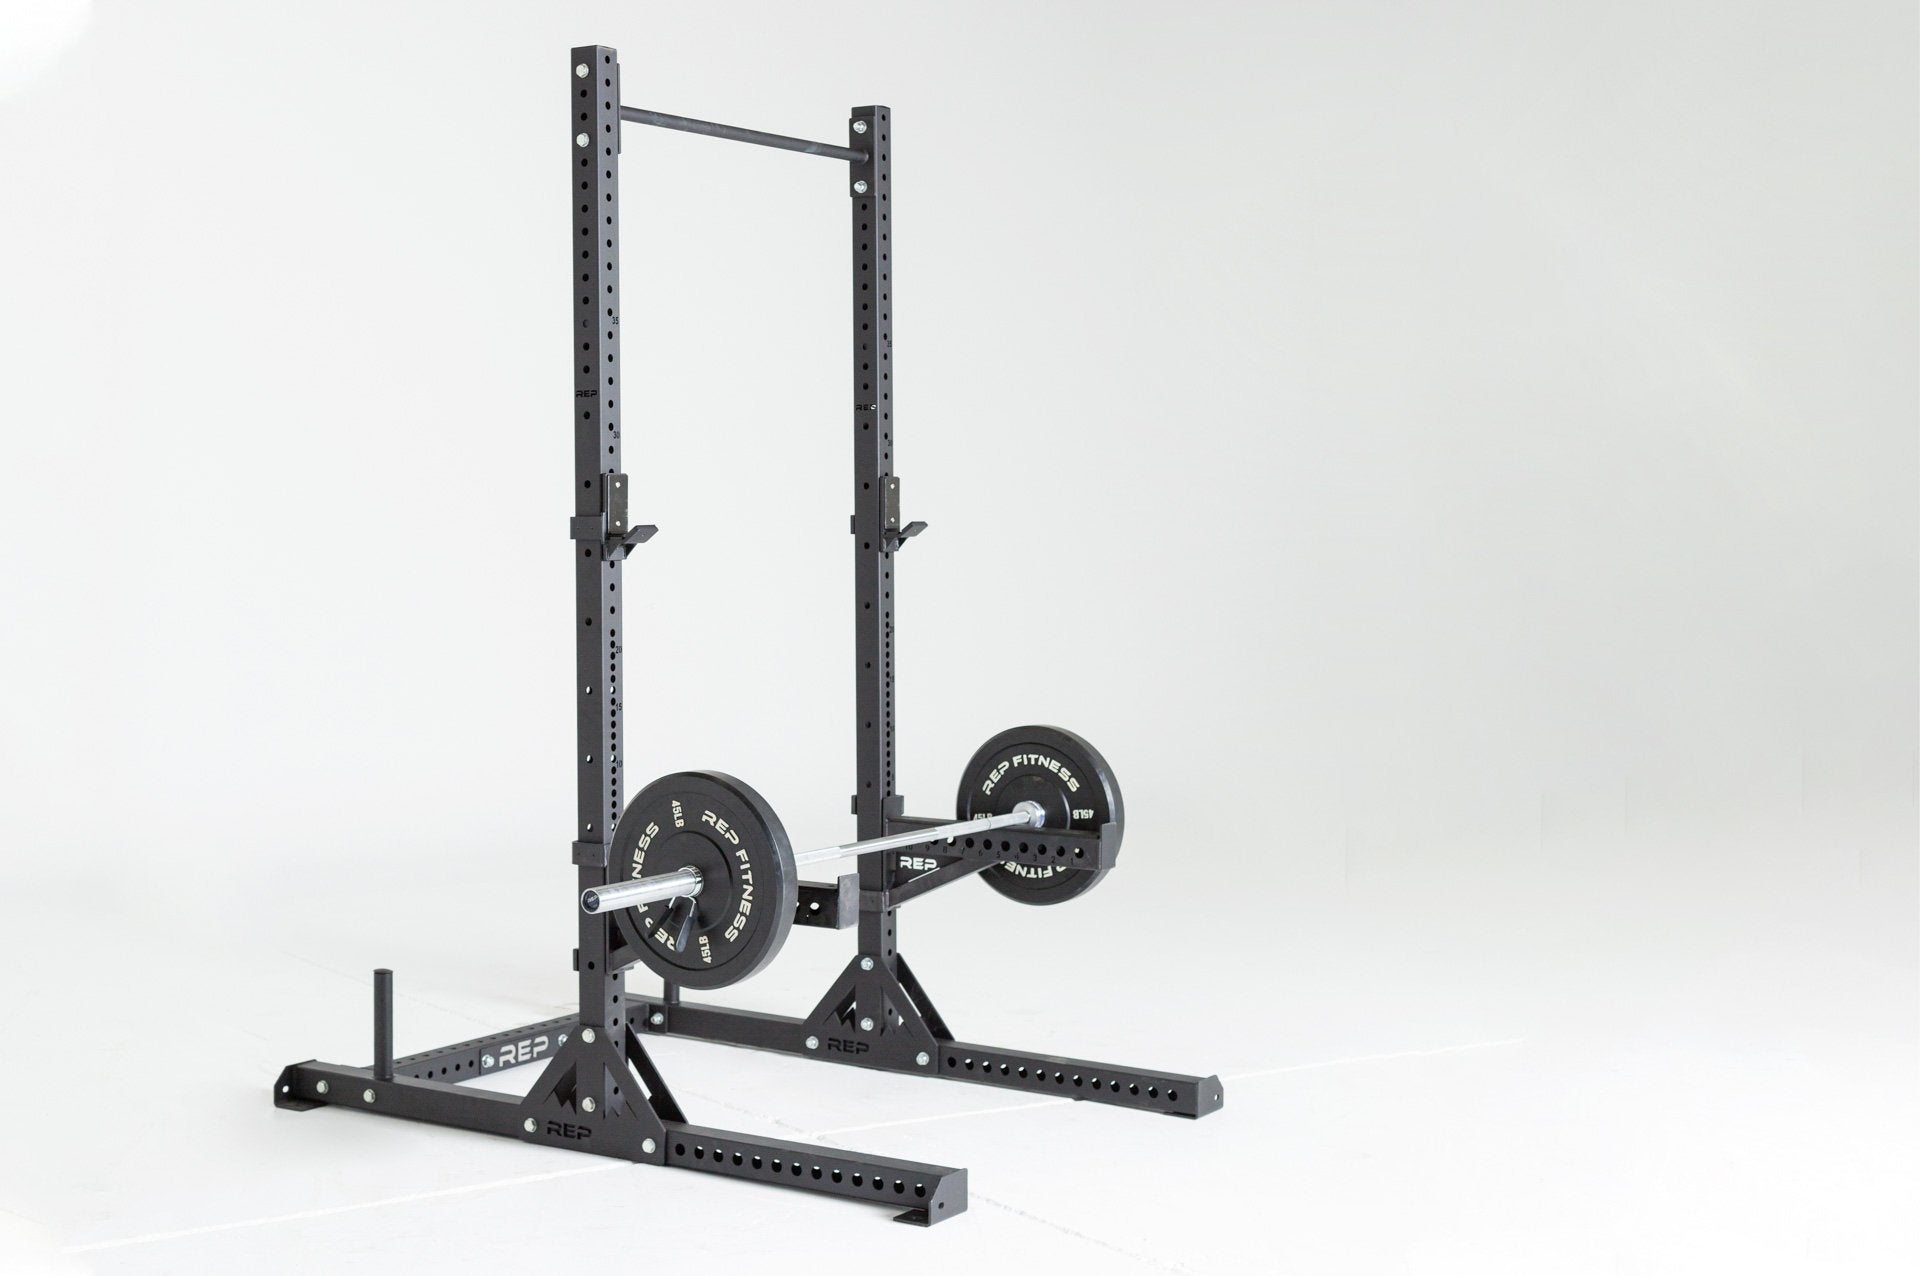 SR-4000 Squat Rack Shown With Spotter Arms 